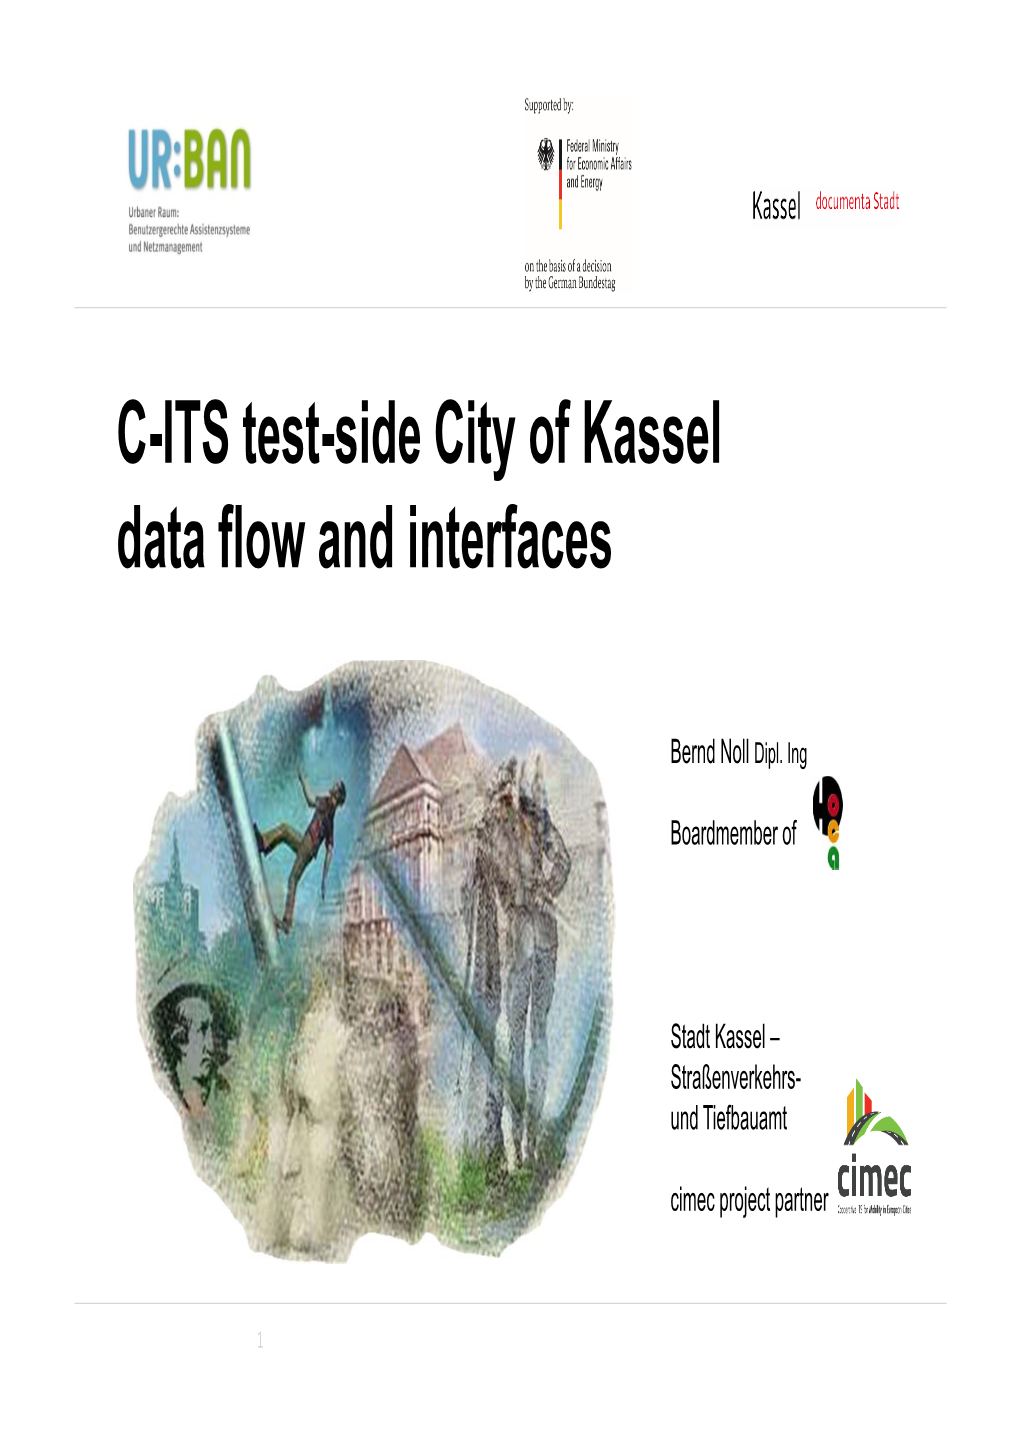 C-ITS Test-Side City of Kassel Data Flow and Interfaces